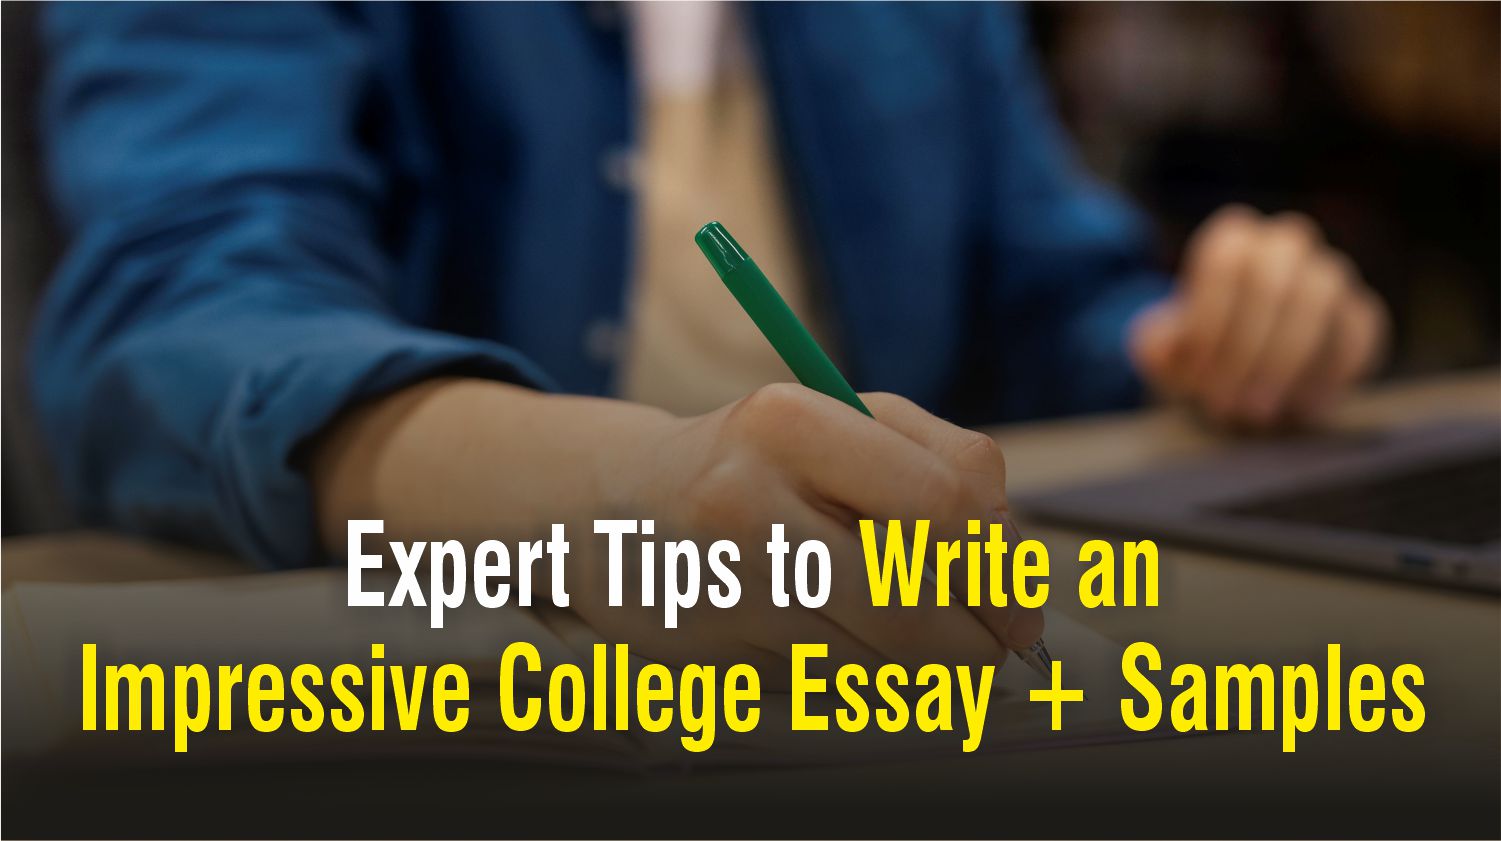  Expert Tips to Write an Impressive College Essay + Samples